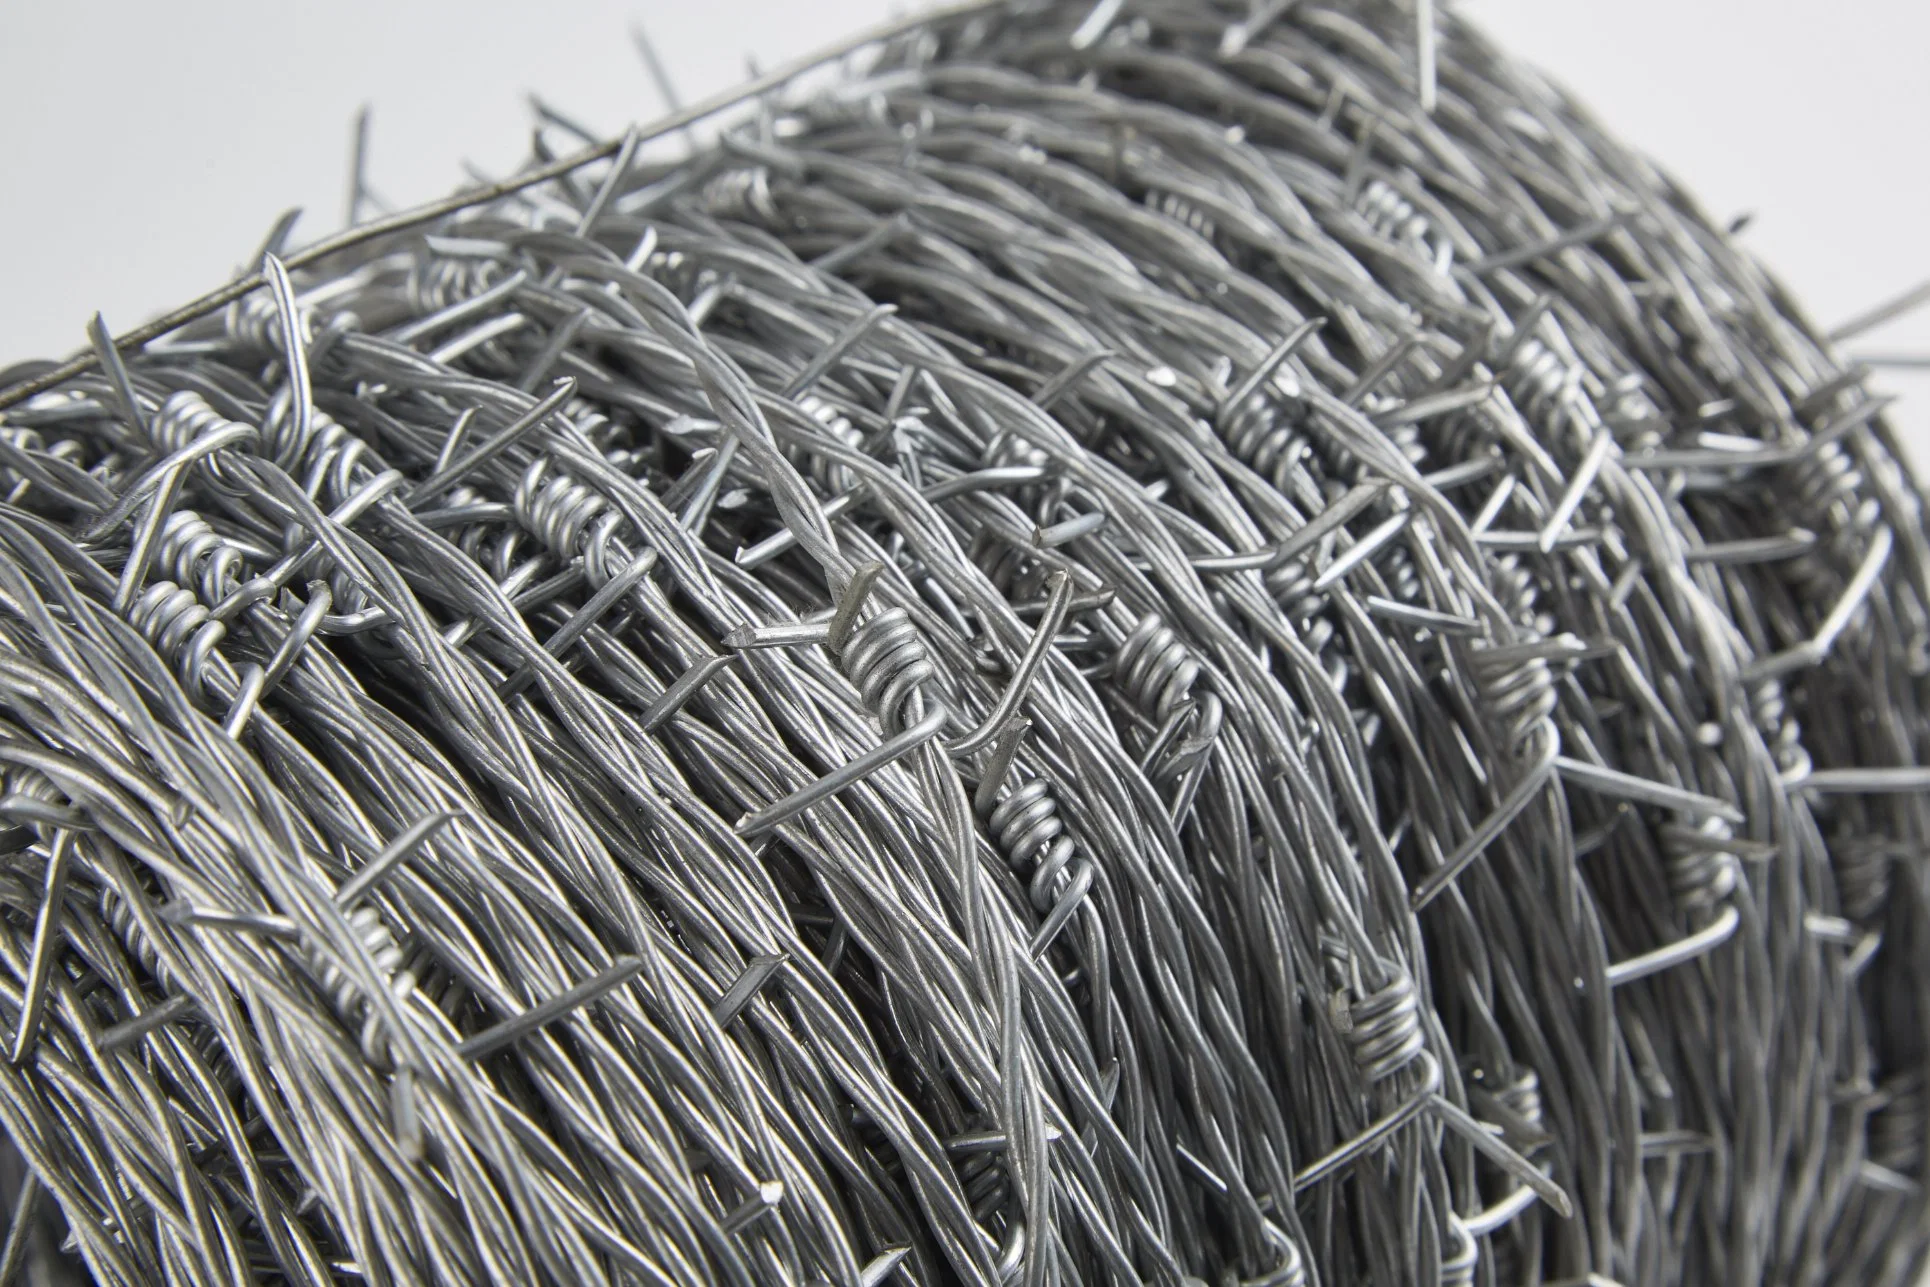 Cheap Price Security Barbed Fencing Wire 1.6mm 500m Galvanized Barbed Wire Price